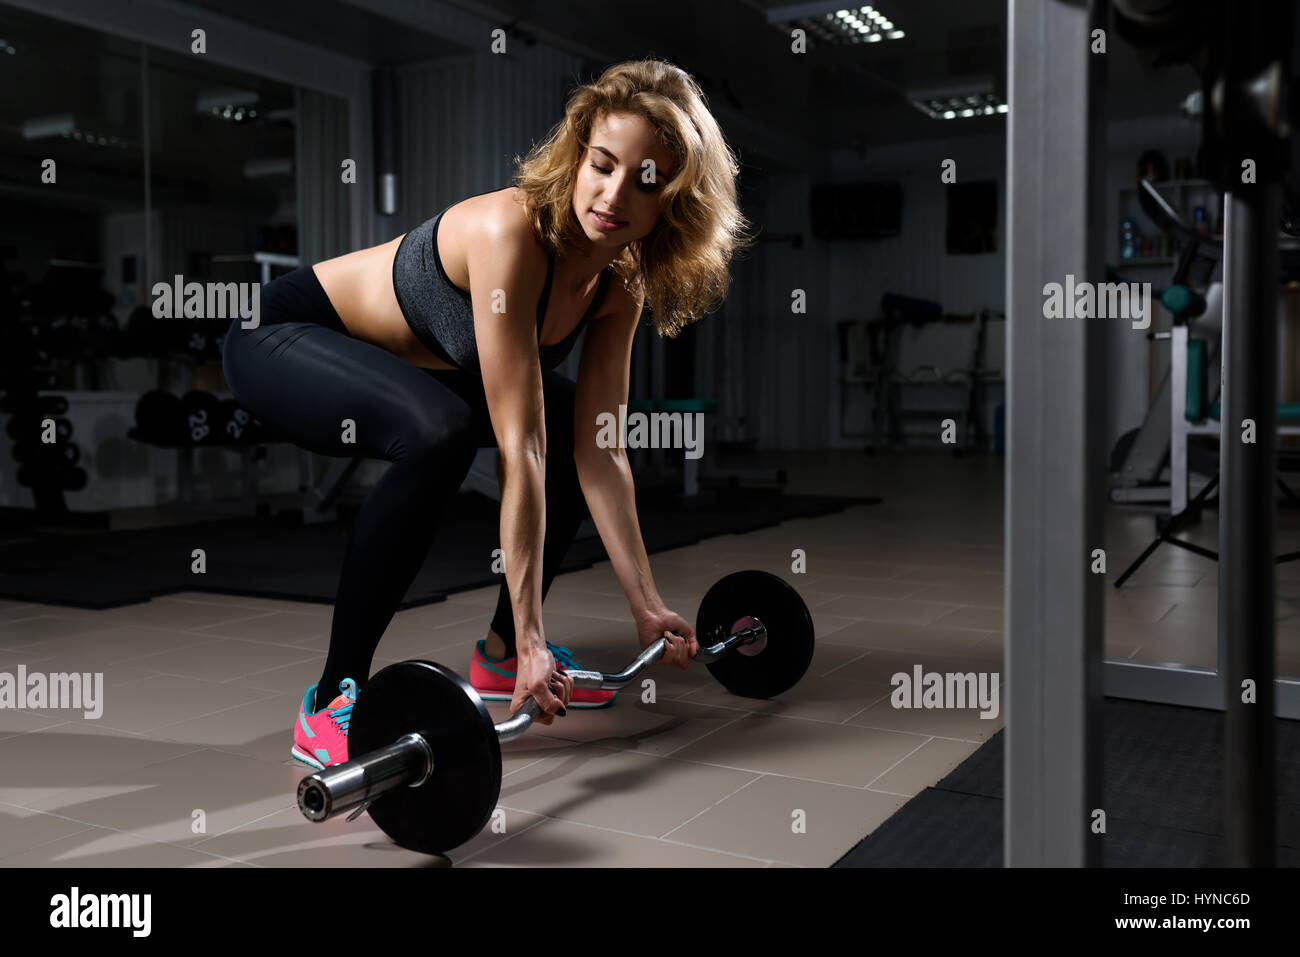 Young blonde girl in black clothes performing dead lift barbell exercises Stock Photo